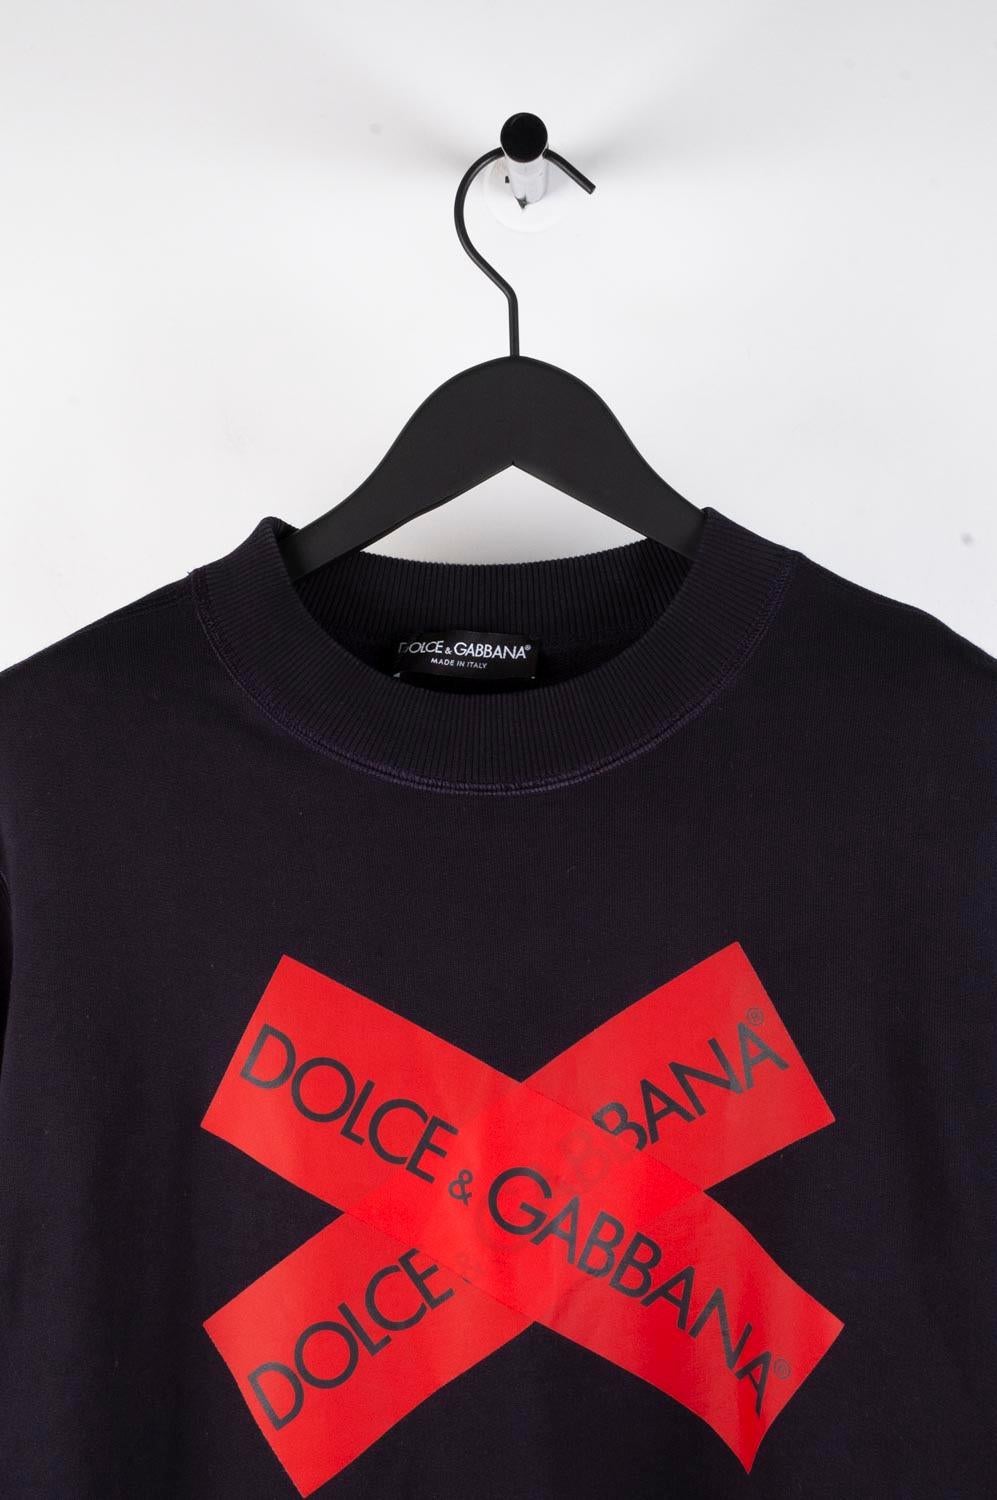 Item for sale is 100% genuine Dolce&Gabbana Sweatshirt, S444
Color: Dark navy
(An actual color may a bit vary due to individual computer screen interpretation)
Material: 100% cotton
Tag size: 46IT runs S/M
This jumper is great quality item. Rate 10